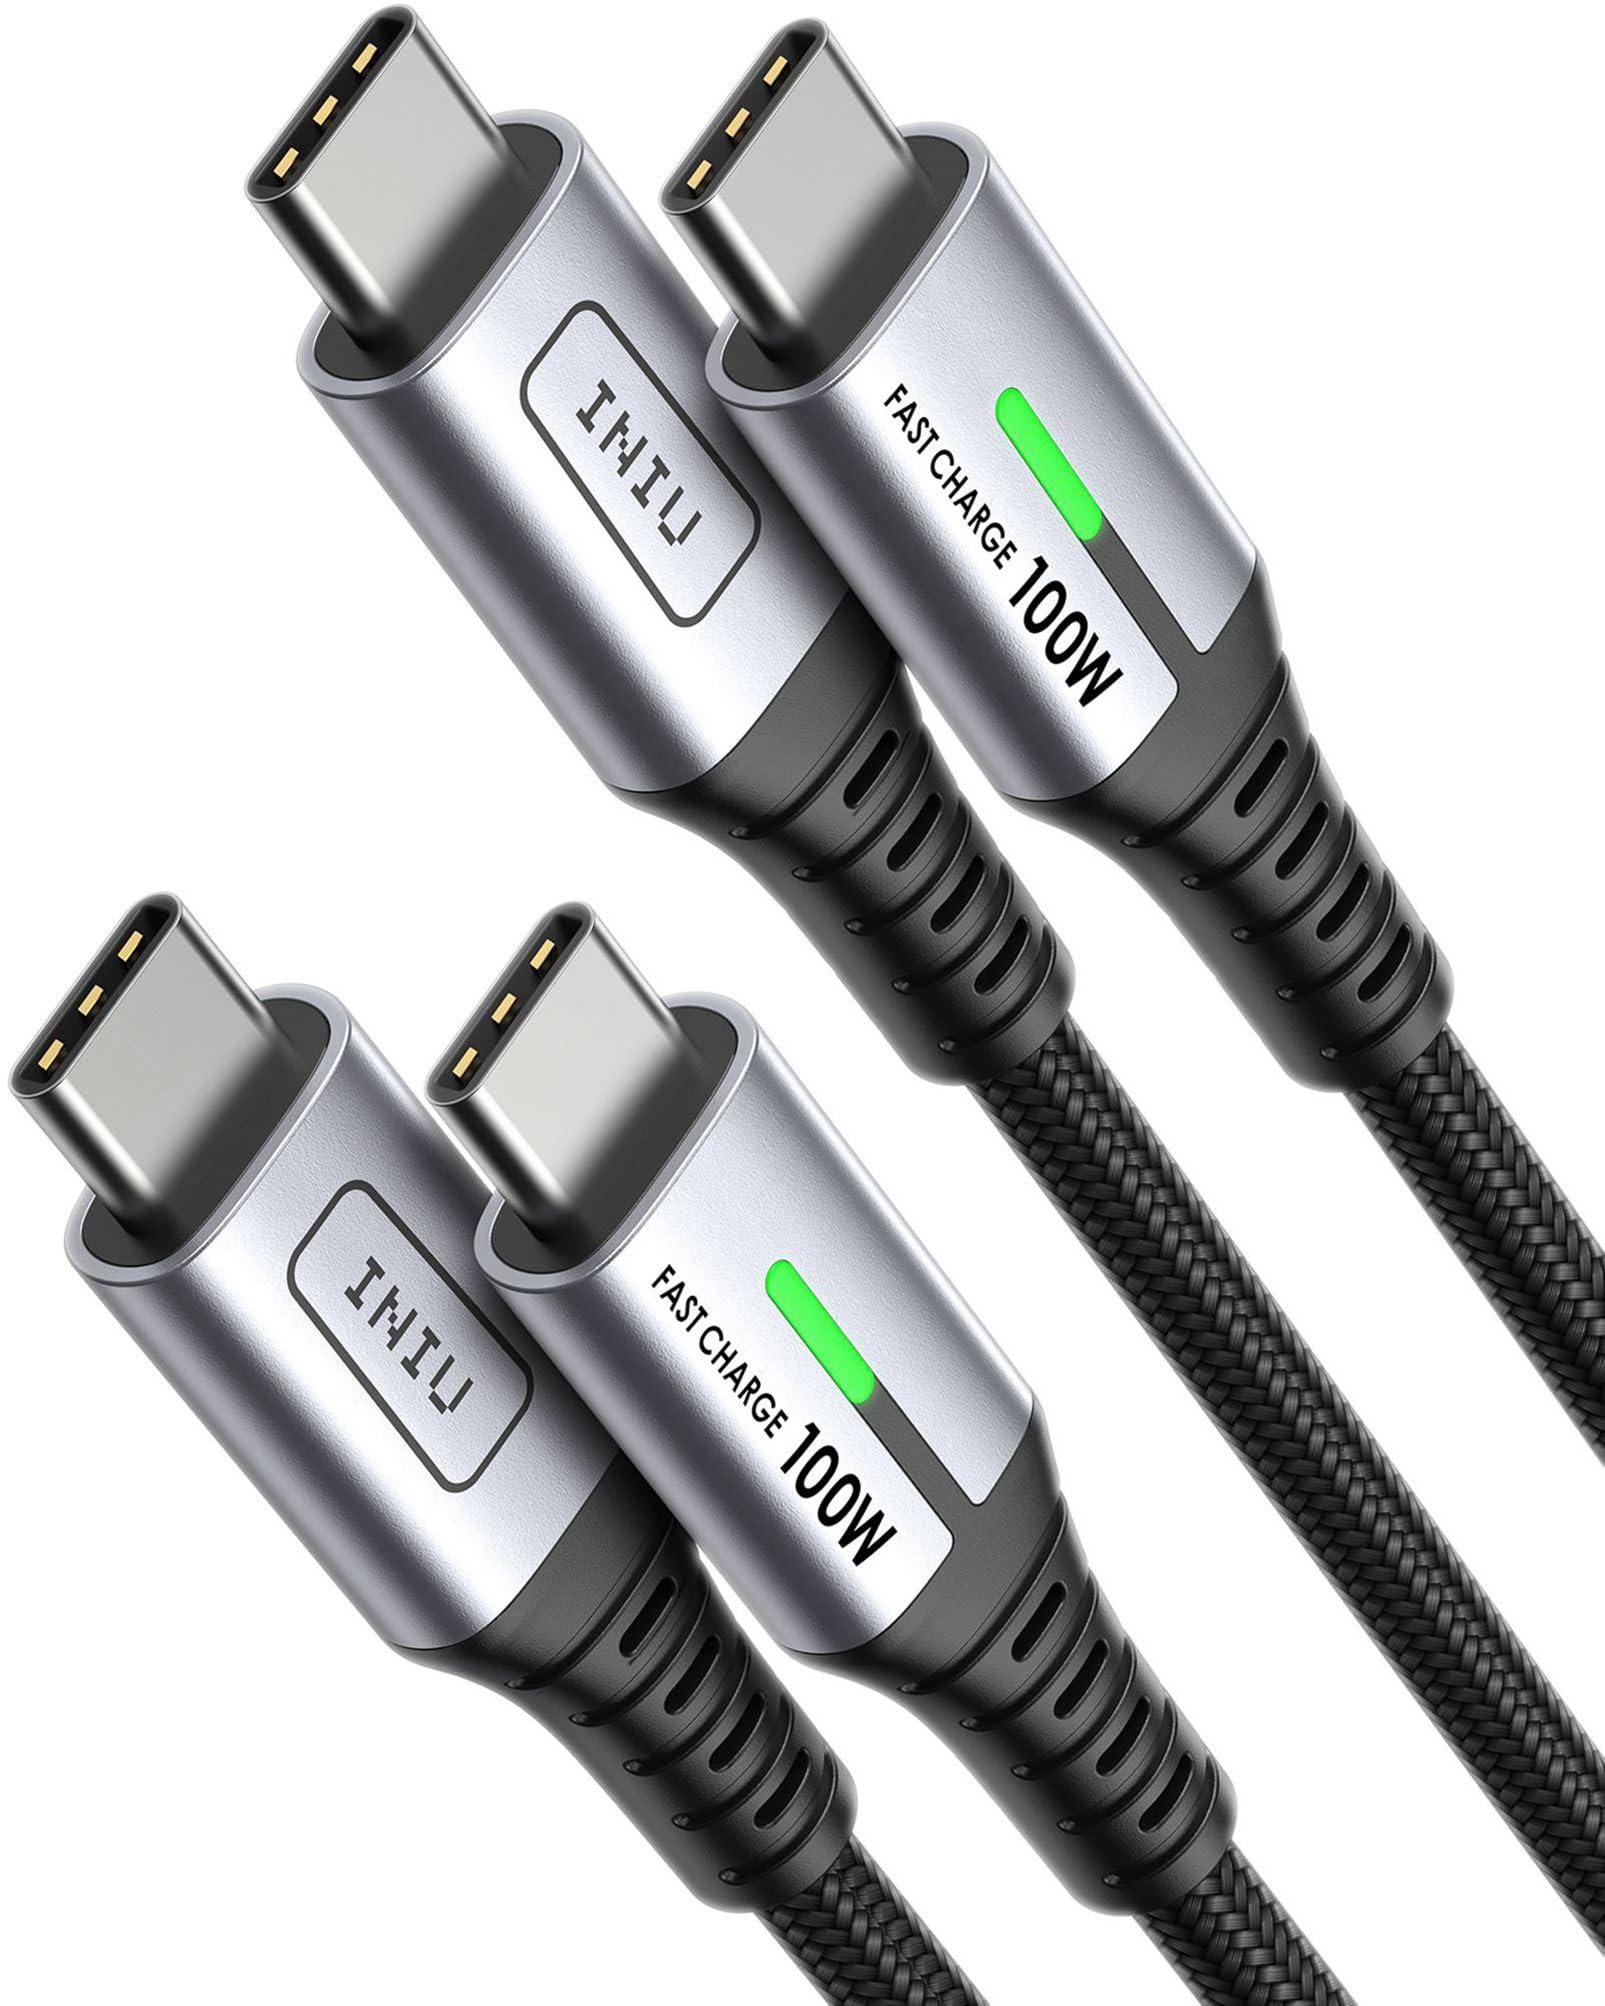 INIU USB C to USB C Cable, (6ft, 2-Pack) 100W USB C to C Fast Charging Cable $4.81